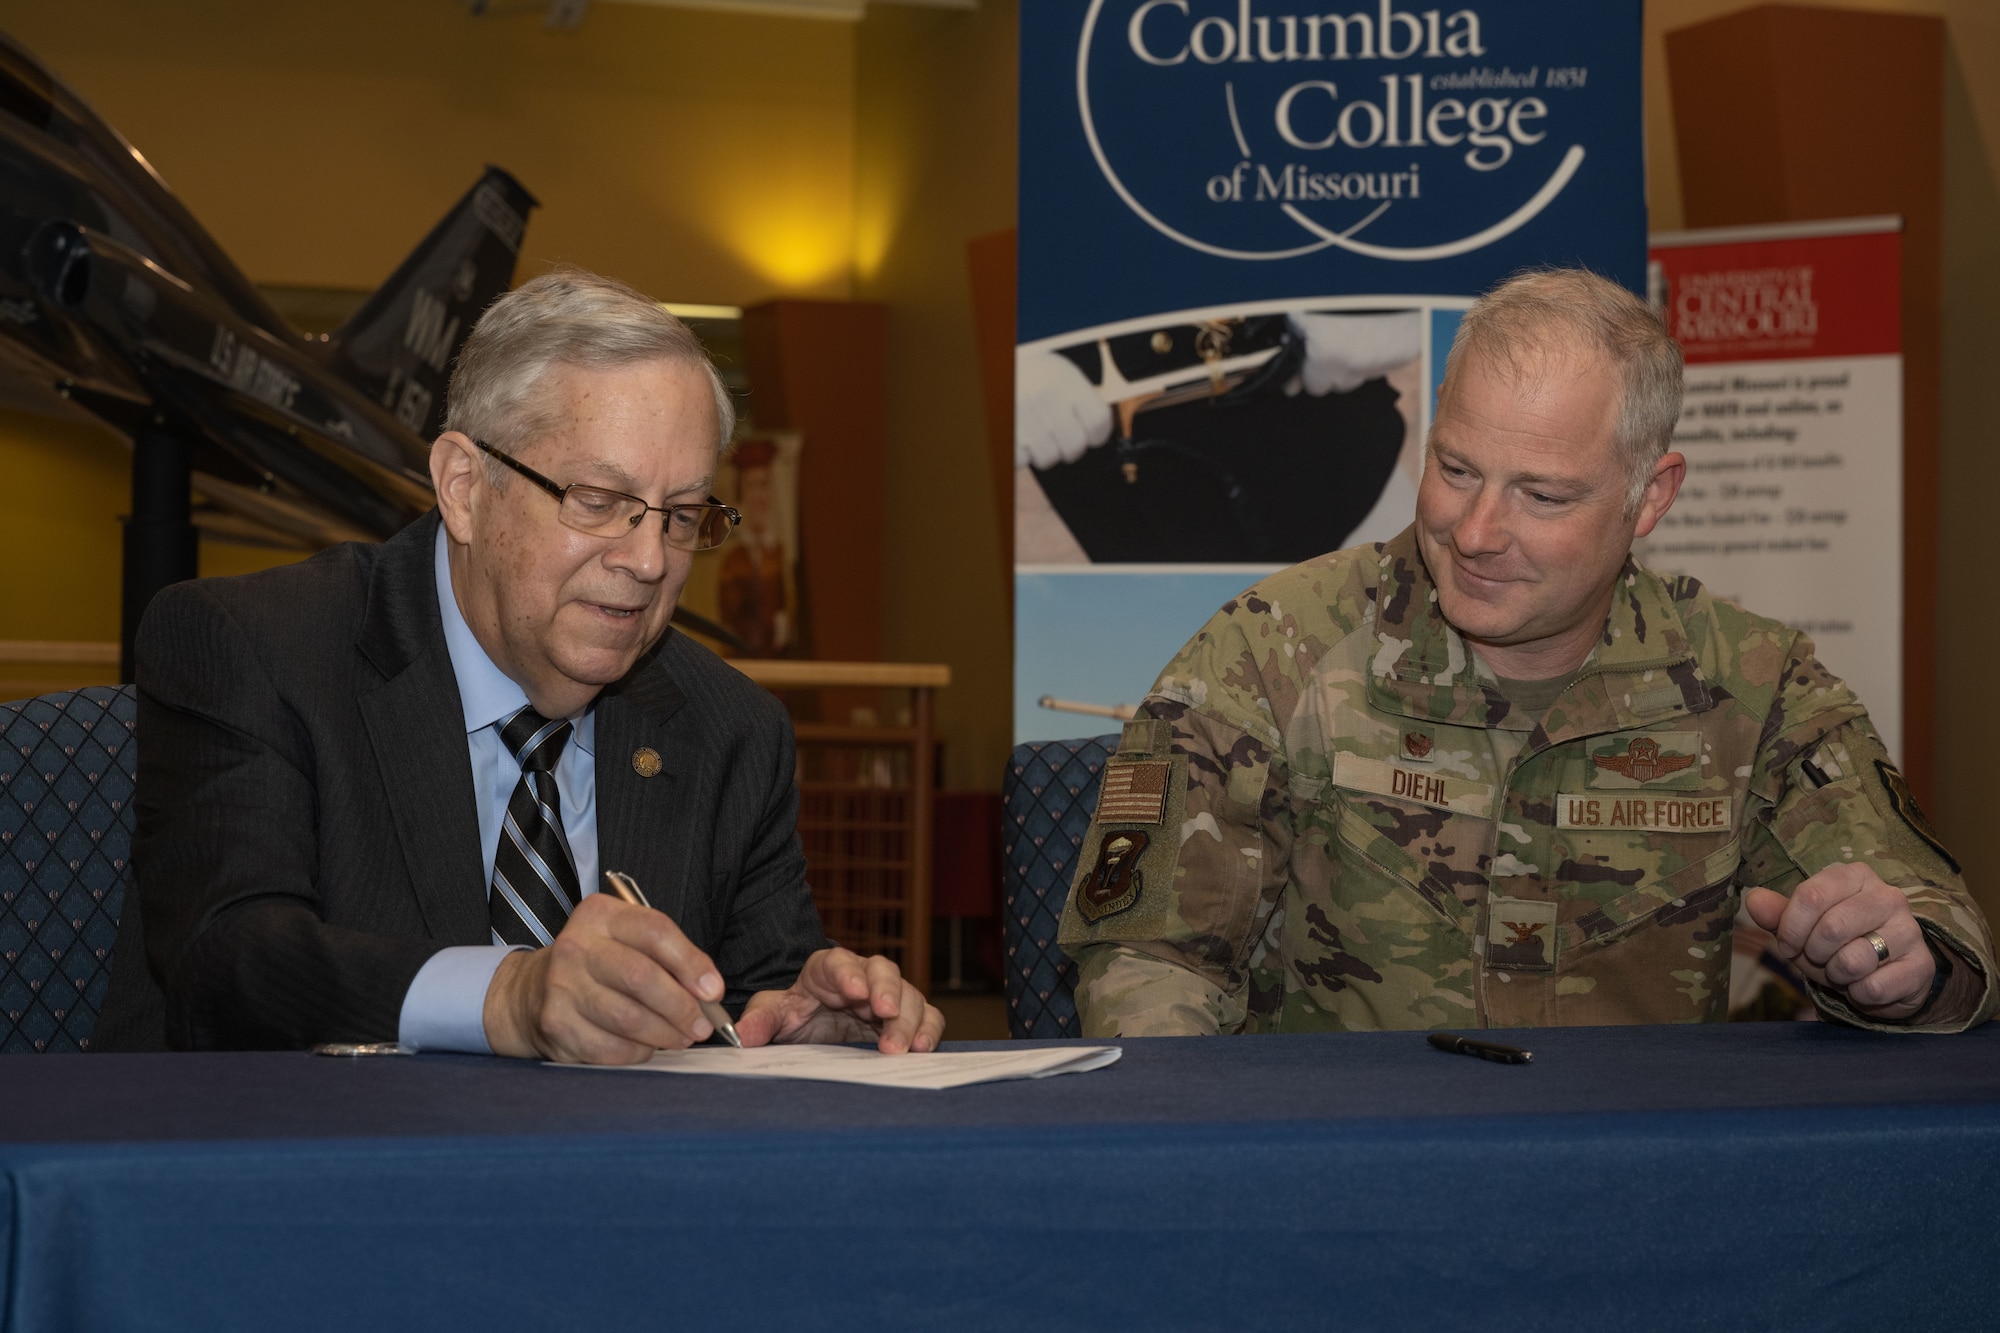 U.S. Air Force Col. Daniel Diehl, Commander of the 509 Bomb Wing, signs a memorandum of understanding between Columbia College and the 509th Bomb Wing on Whiteman Air Force Base on April 14,2022. The memorandum acknowledges Columbia College's partnership by opening it's programs to the Air Force Voluntary Education Program (U.S. Air Force Photo by Airman 1st Class Bryson Britt)